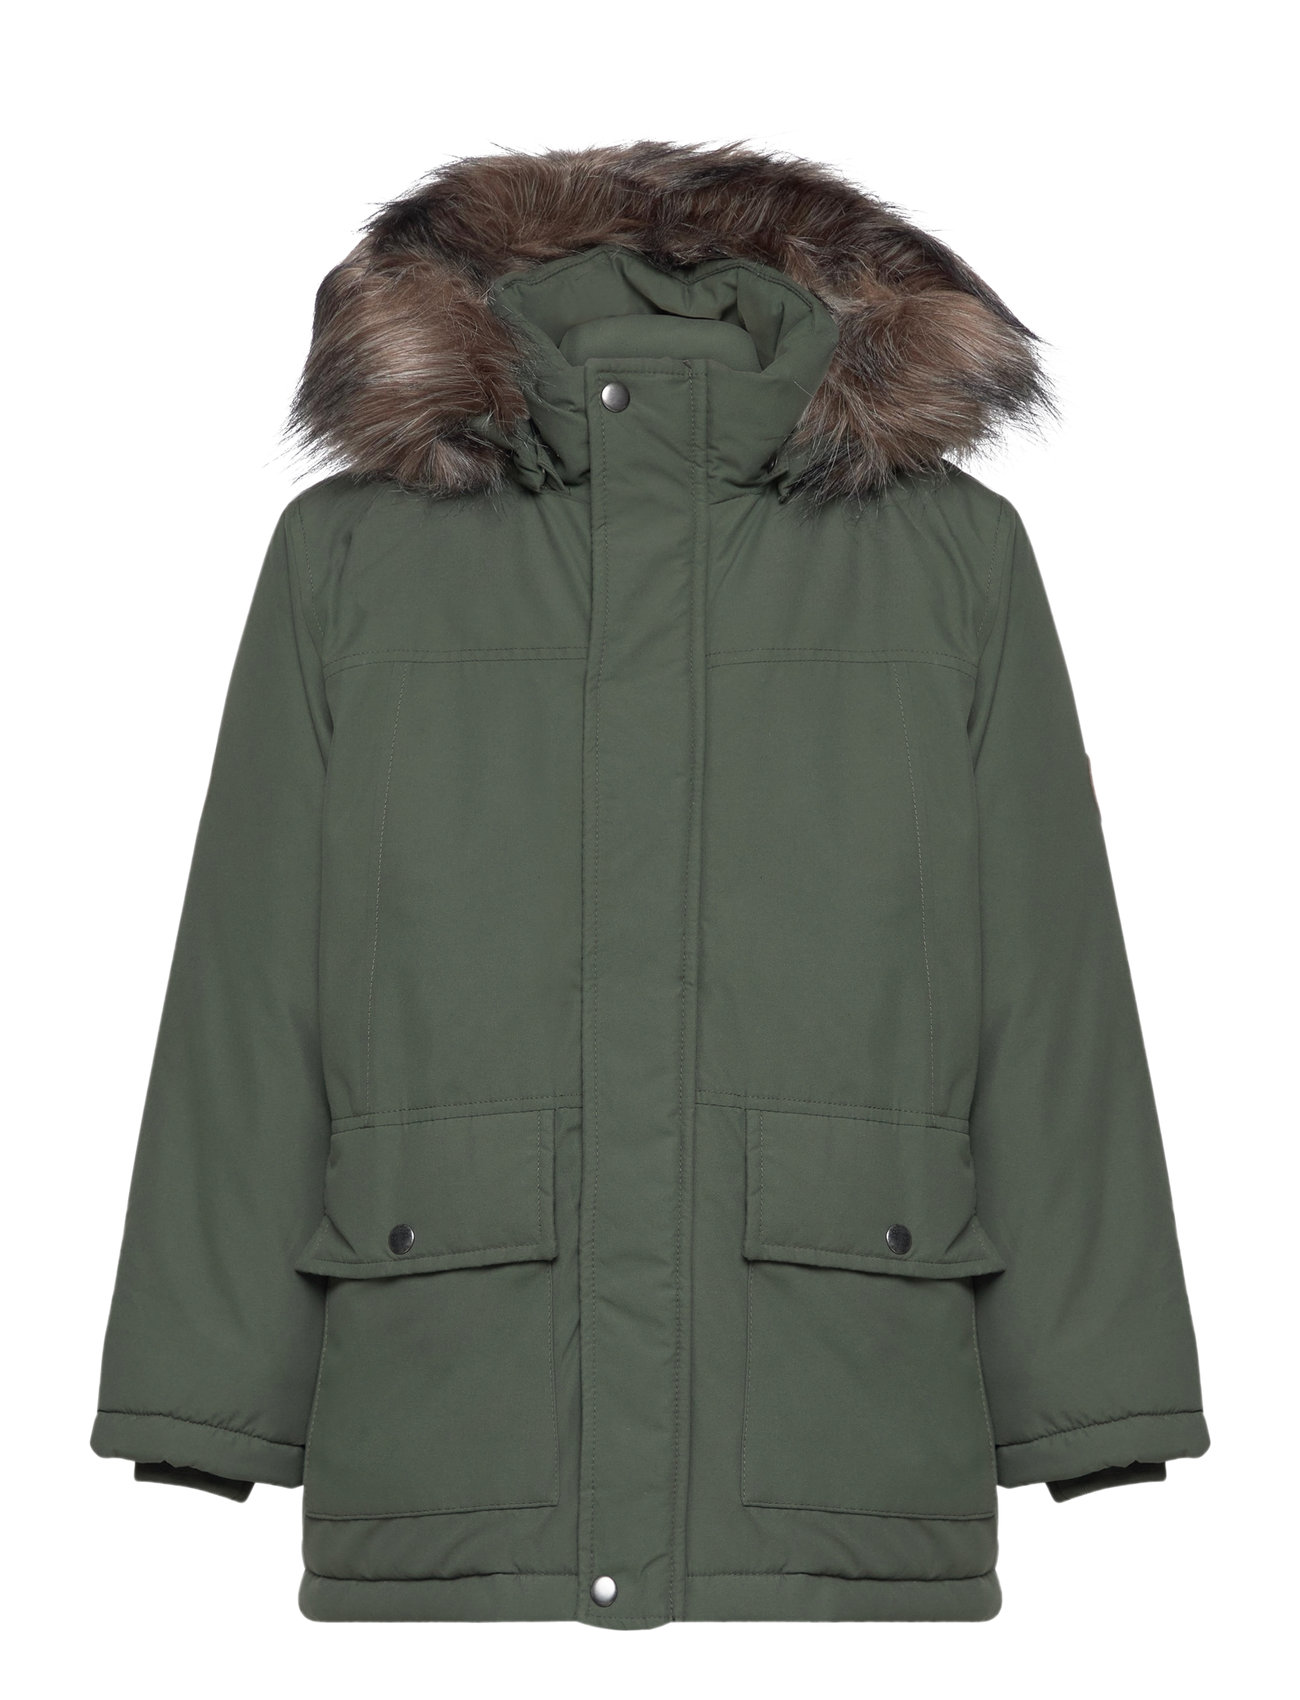 Pb it Fo Parkas Boozt.com. name online easy returns and Buy Nkmmarlin Jacket from Parka it 27.50 €. name Fast at delivery -